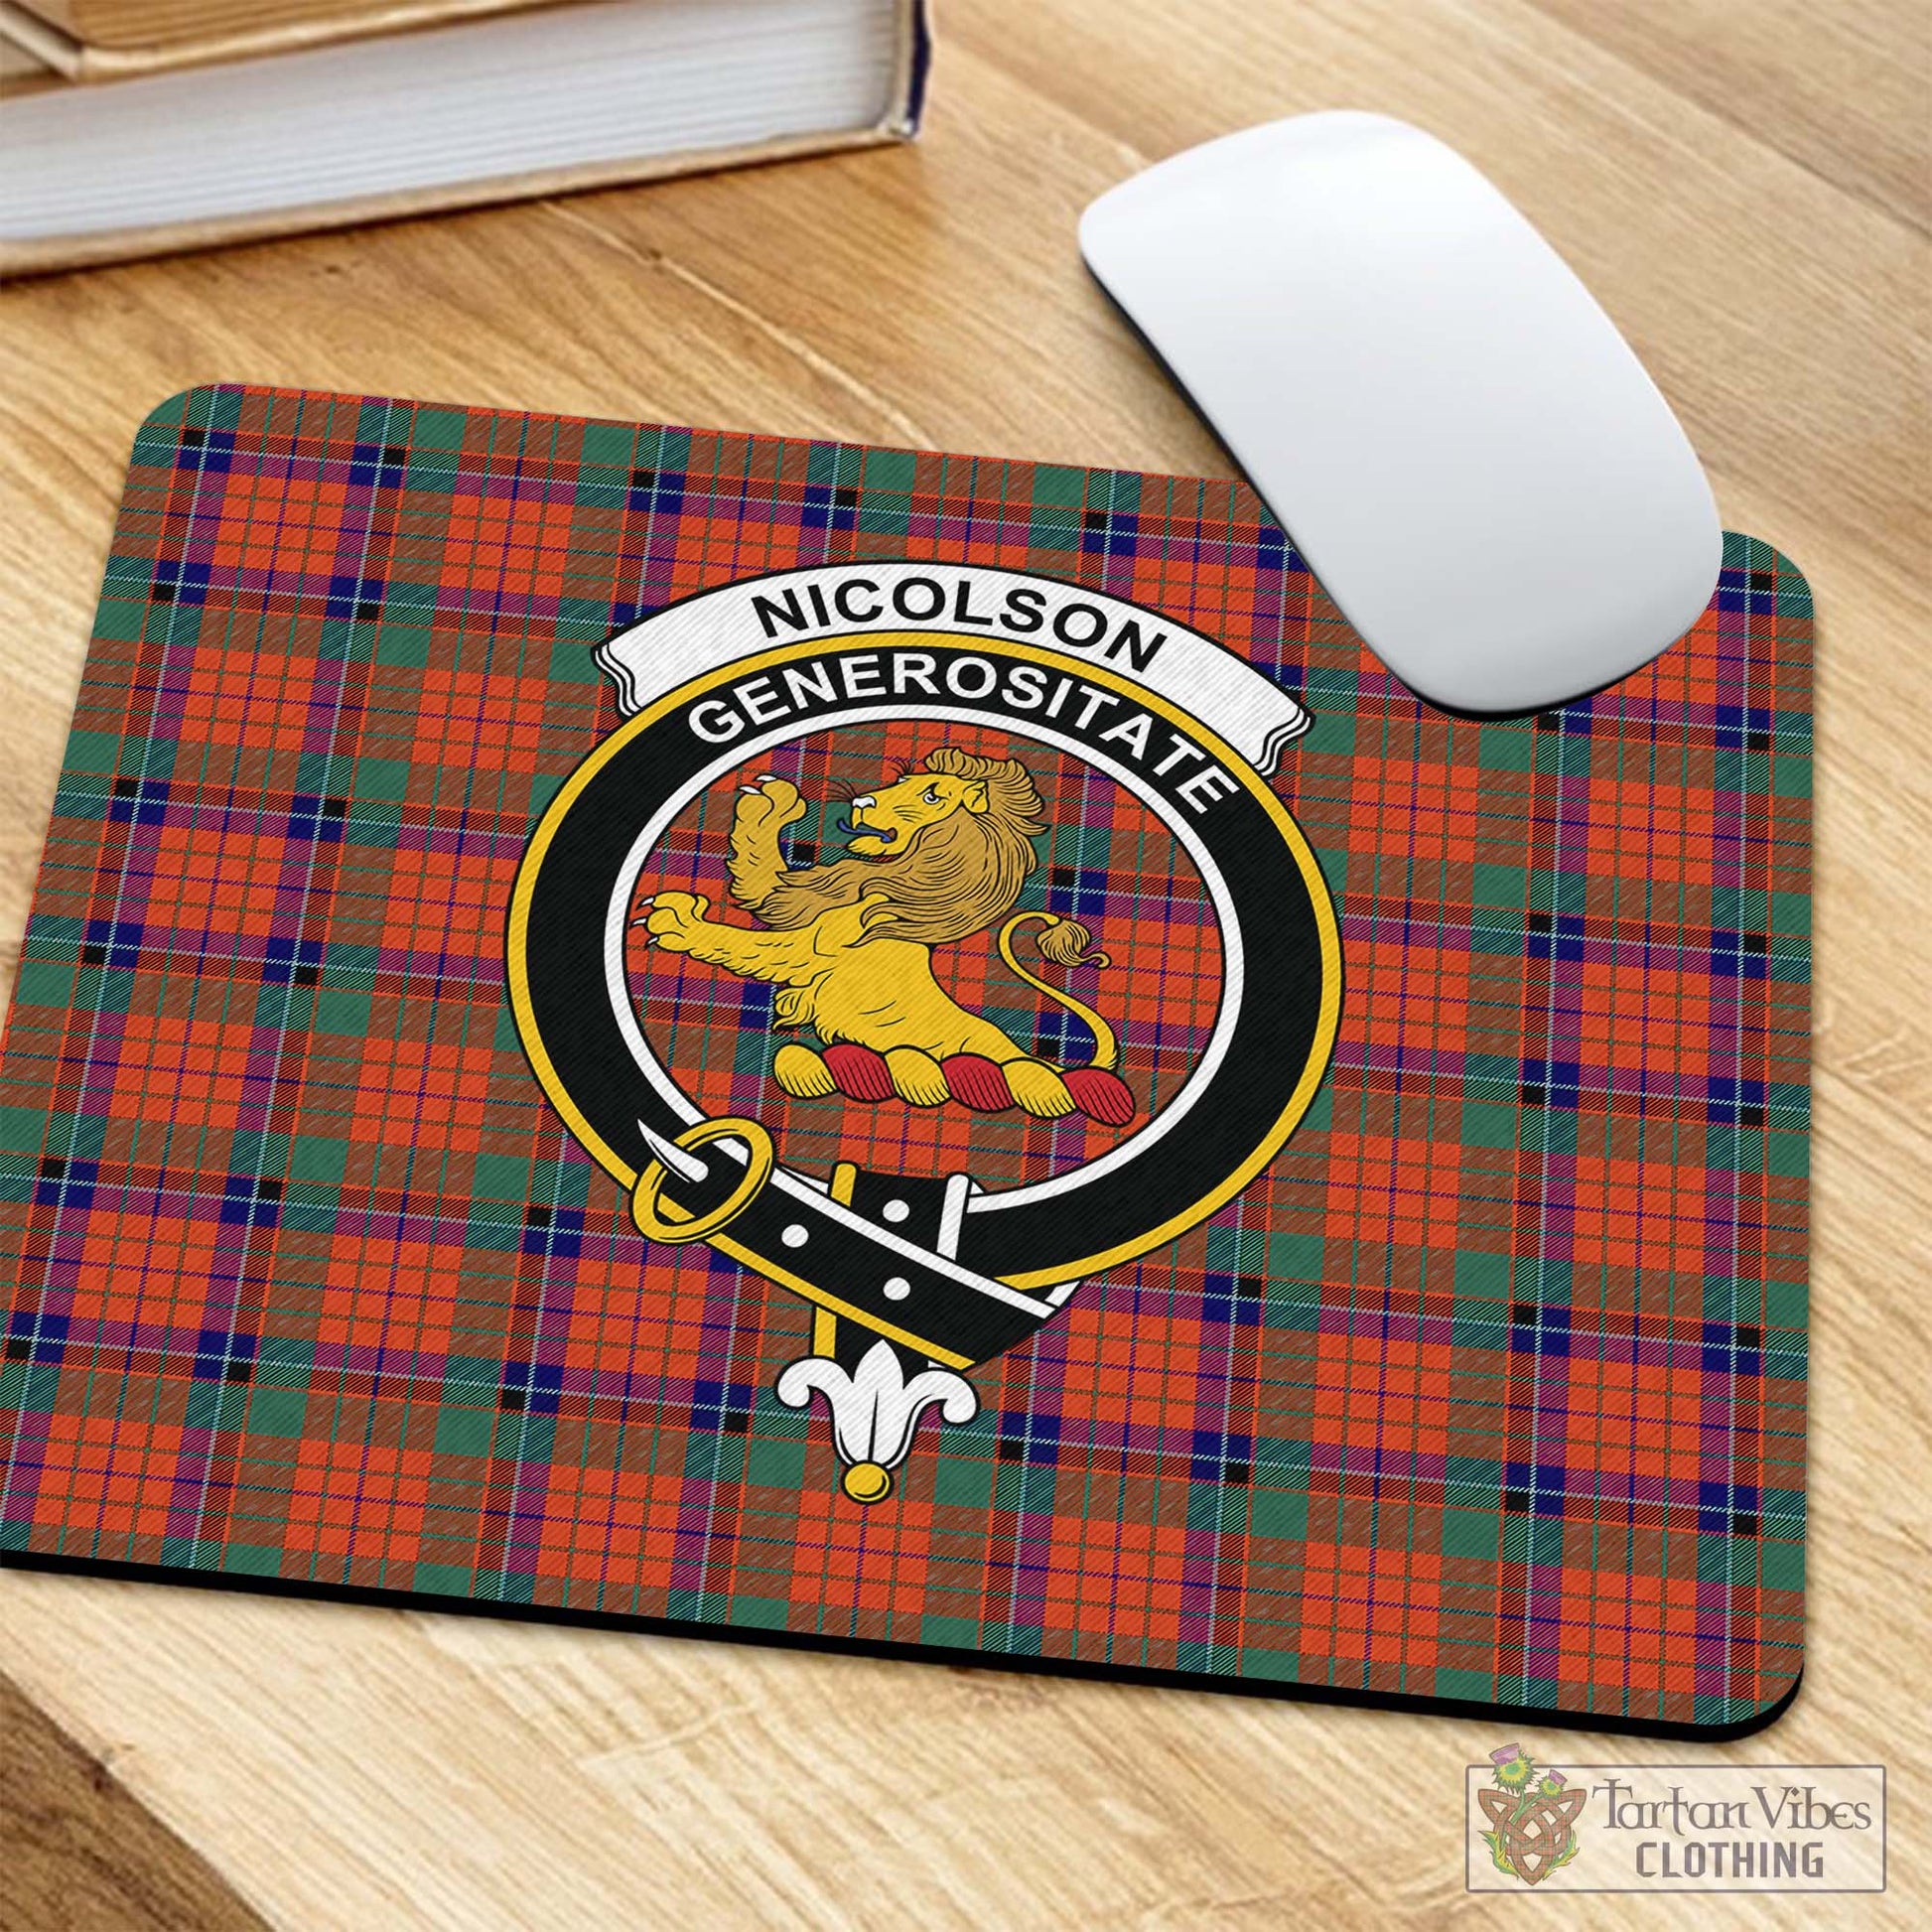 Tartan Vibes Clothing Nicolson Ancient Tartan Mouse Pad with Family Crest